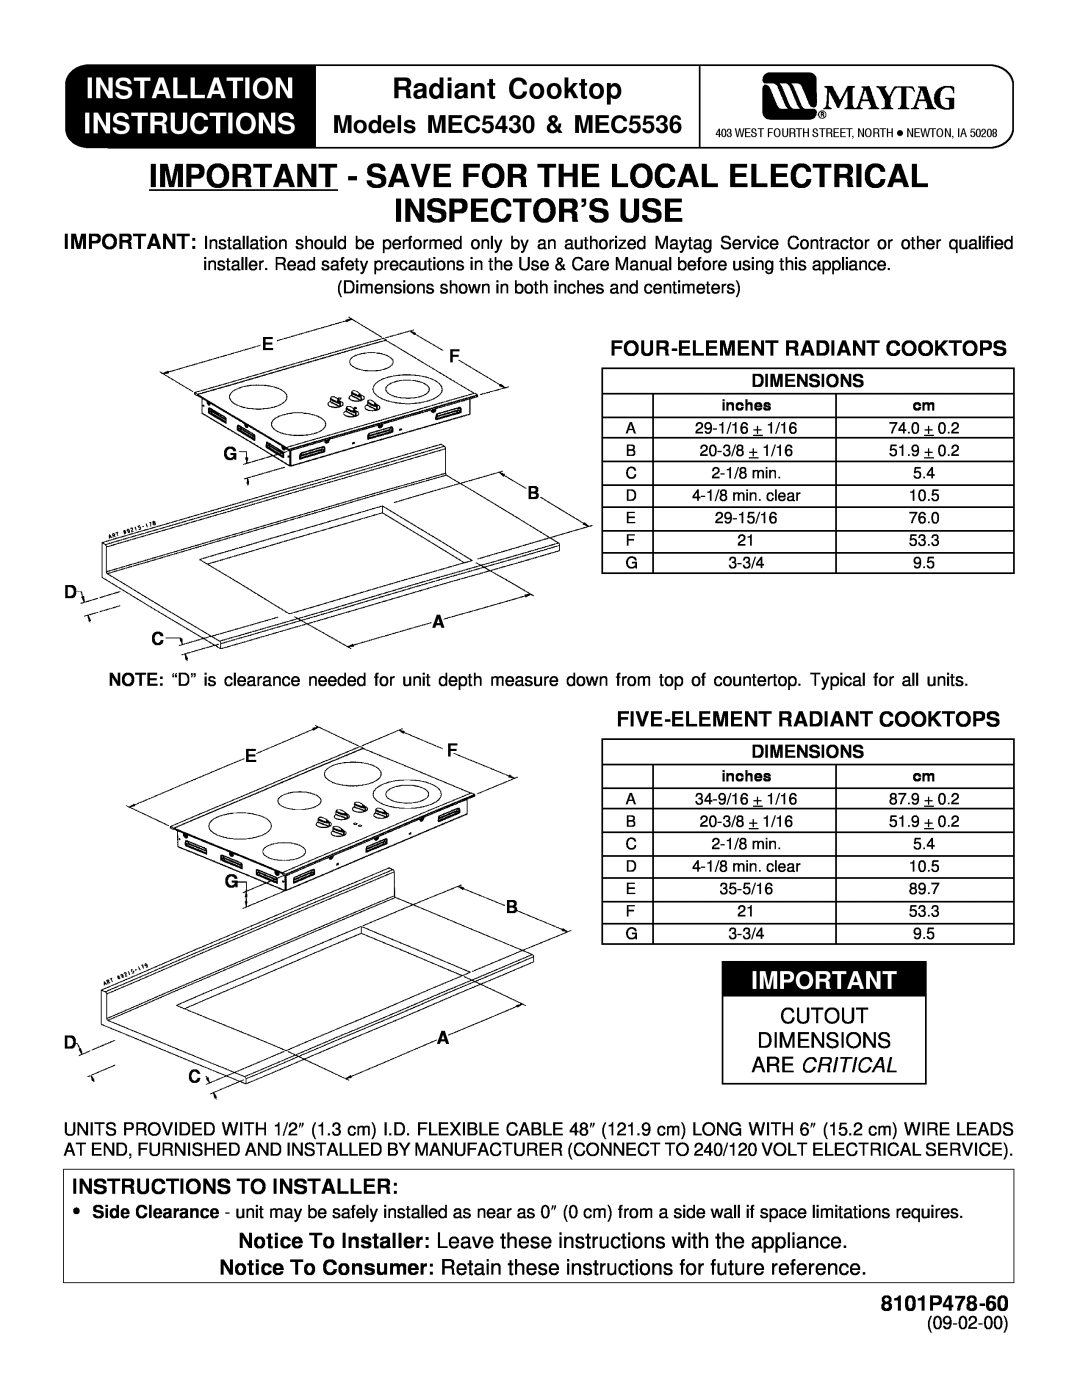 Maytag MEC5430, MEC5536 installation instructions Important- Save For The Local Electrical, Inspector’S Use, 8101P478-60 